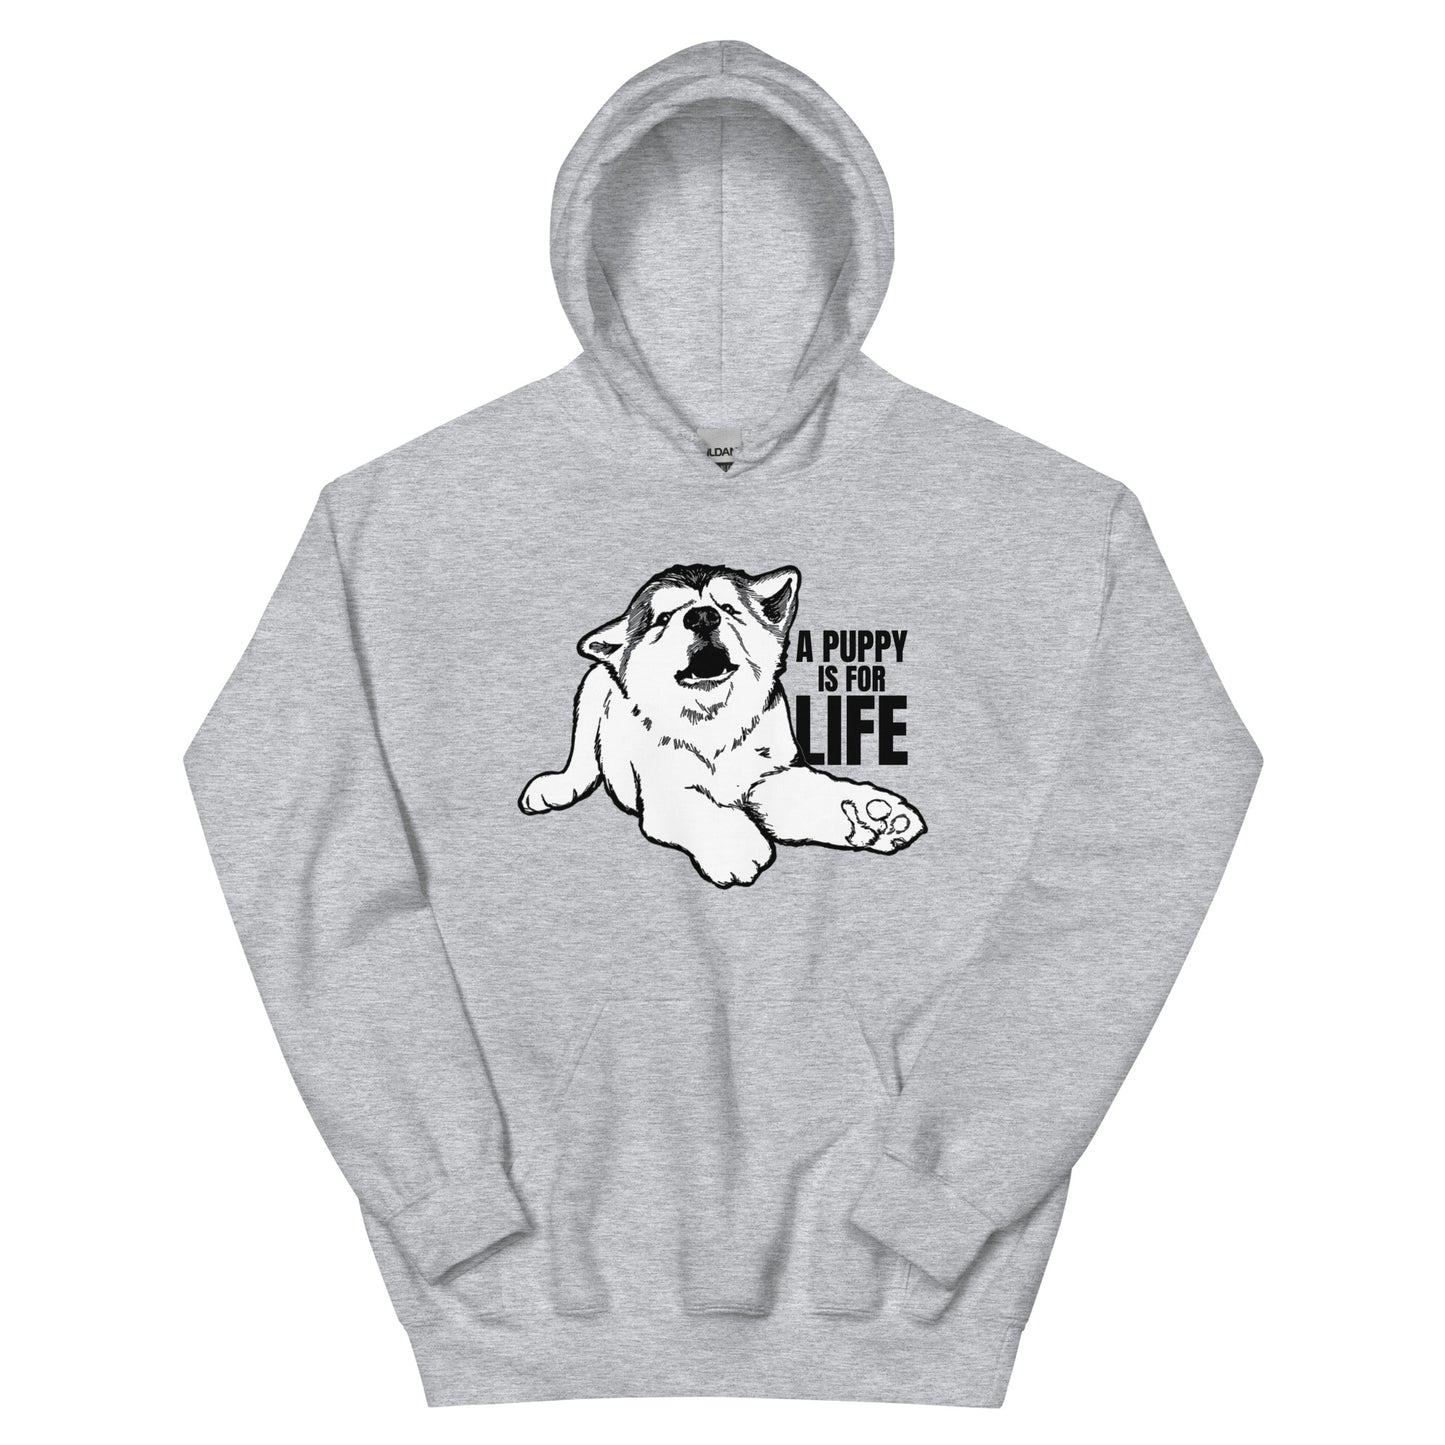 A Puppy Is For Life - Malamute - Pullover Hoodie